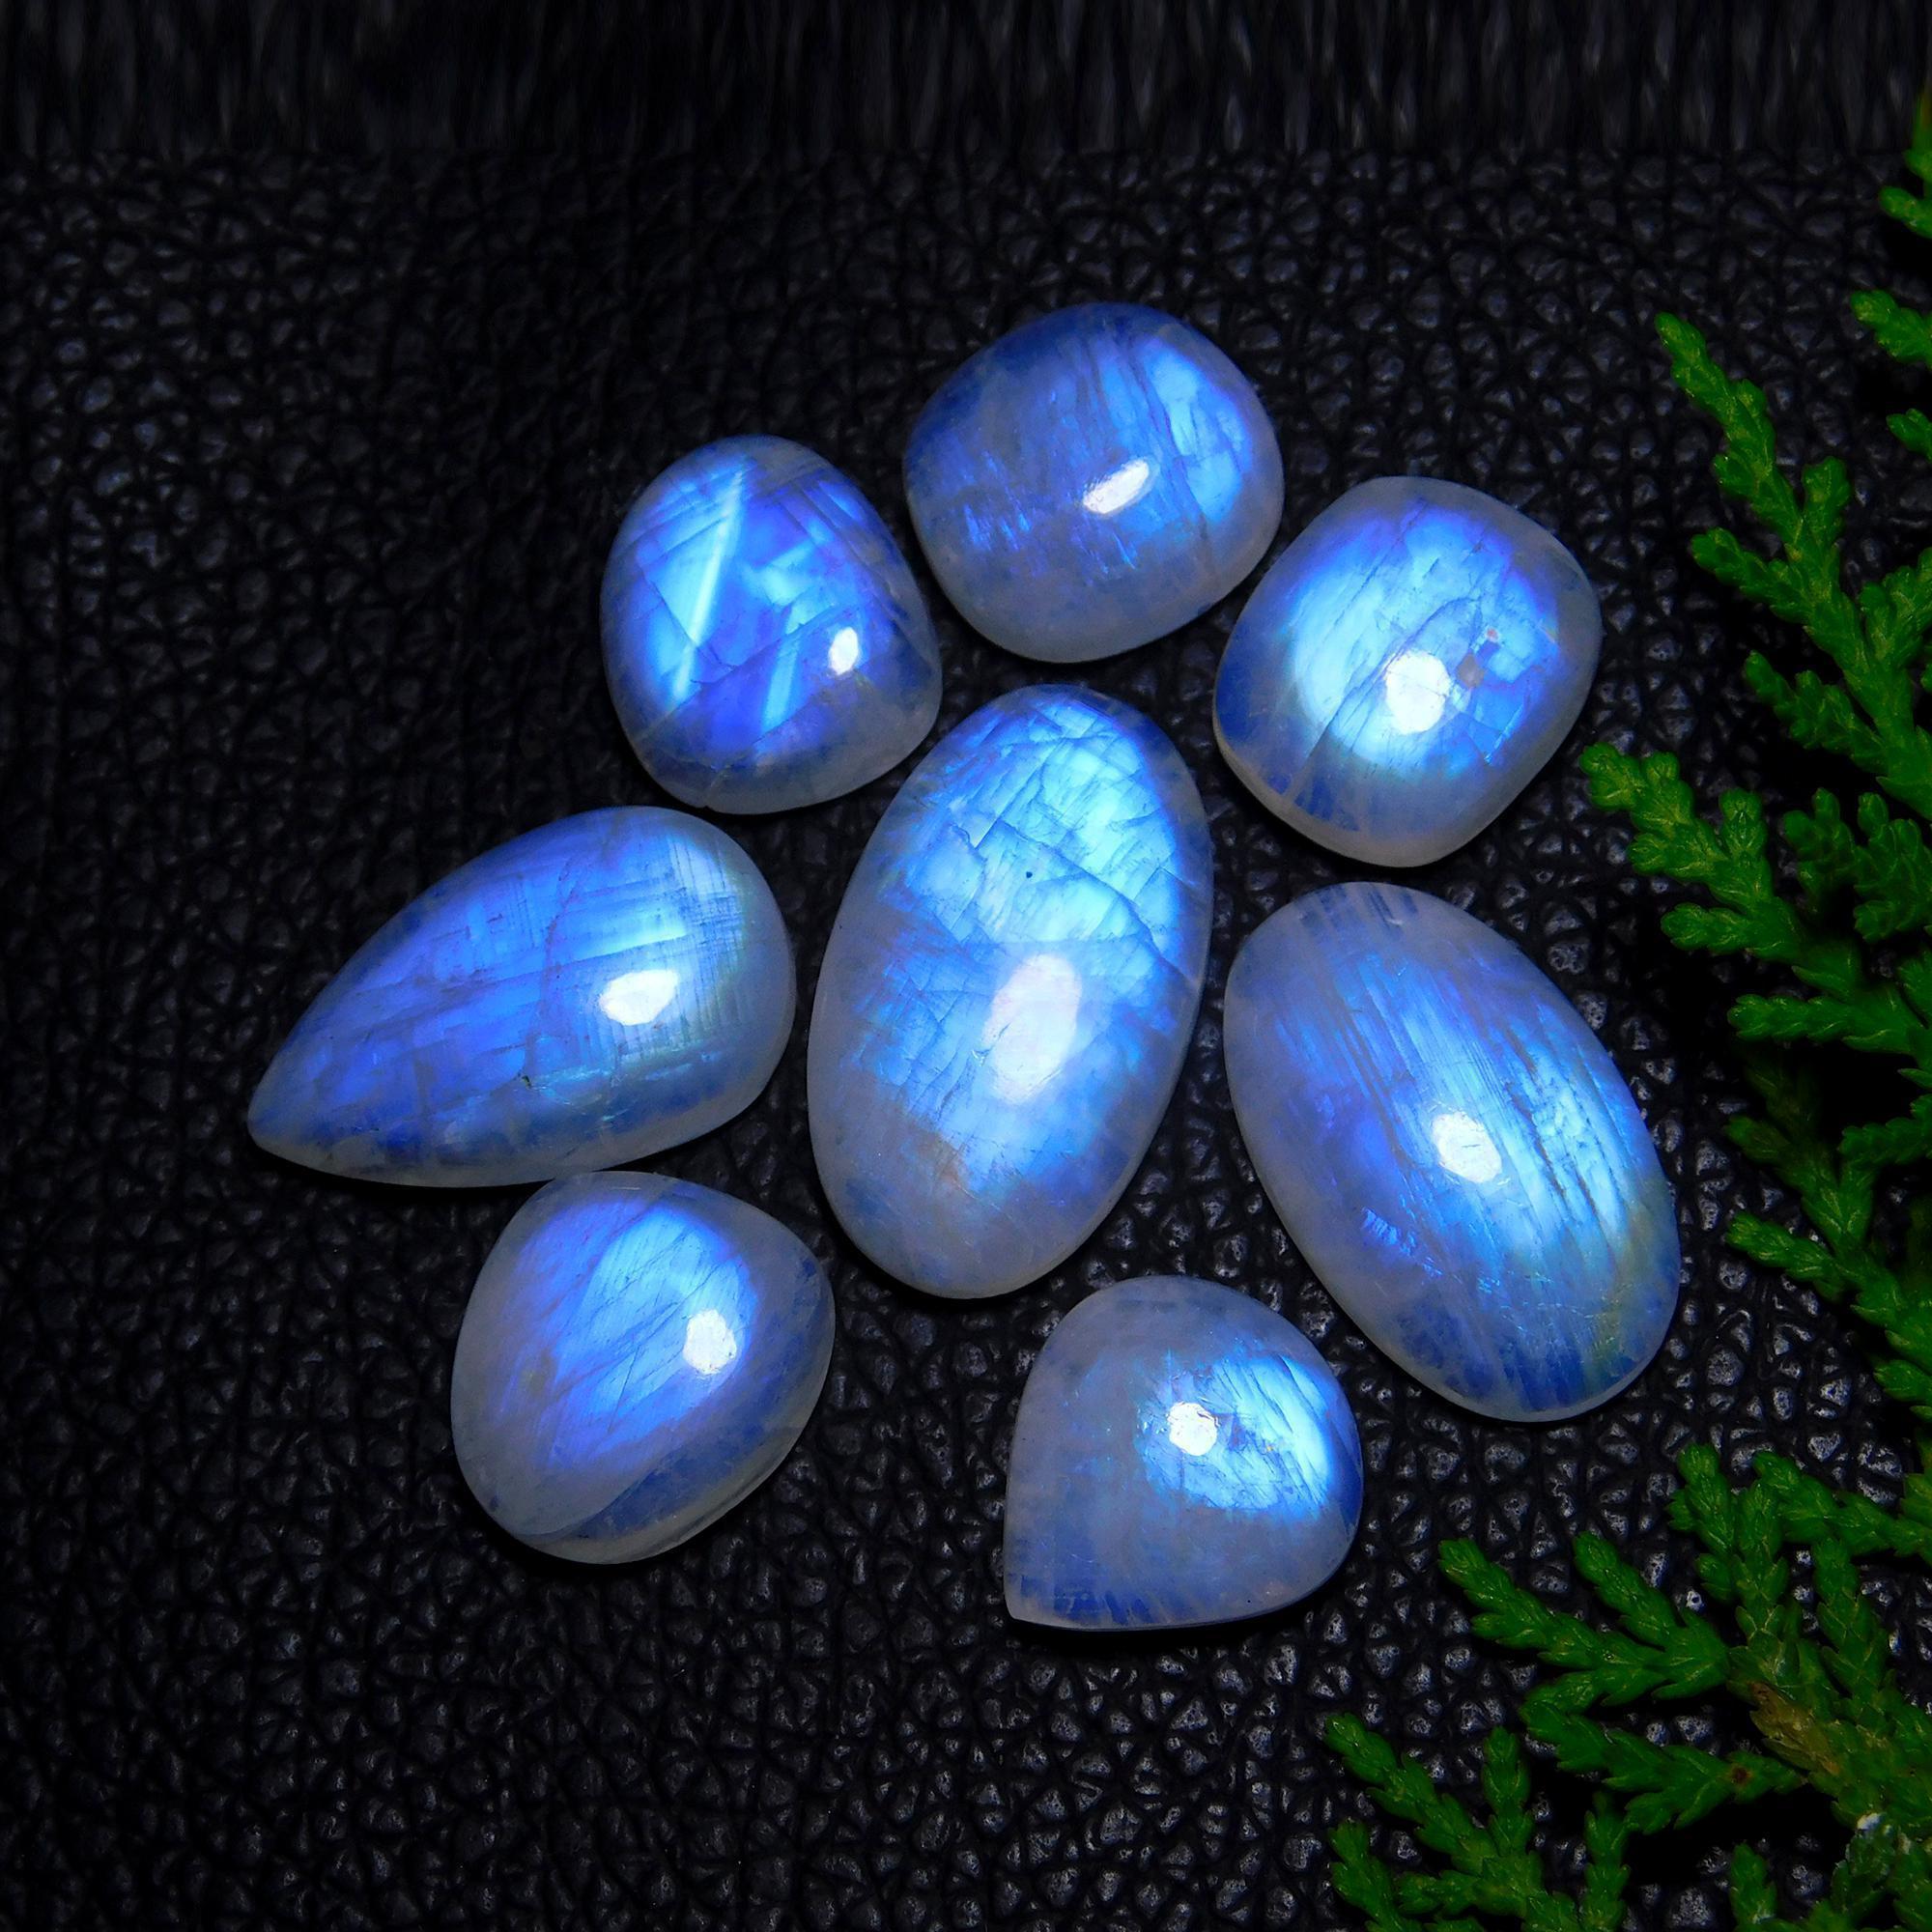 8Pcs 80Cts Natural Rainbow Moonstone Cabochon Blue Fire Loose Gemstone Crystal jewelry supplies wholesale lot gift for her Black Friday 24X12 12X12mm#9425